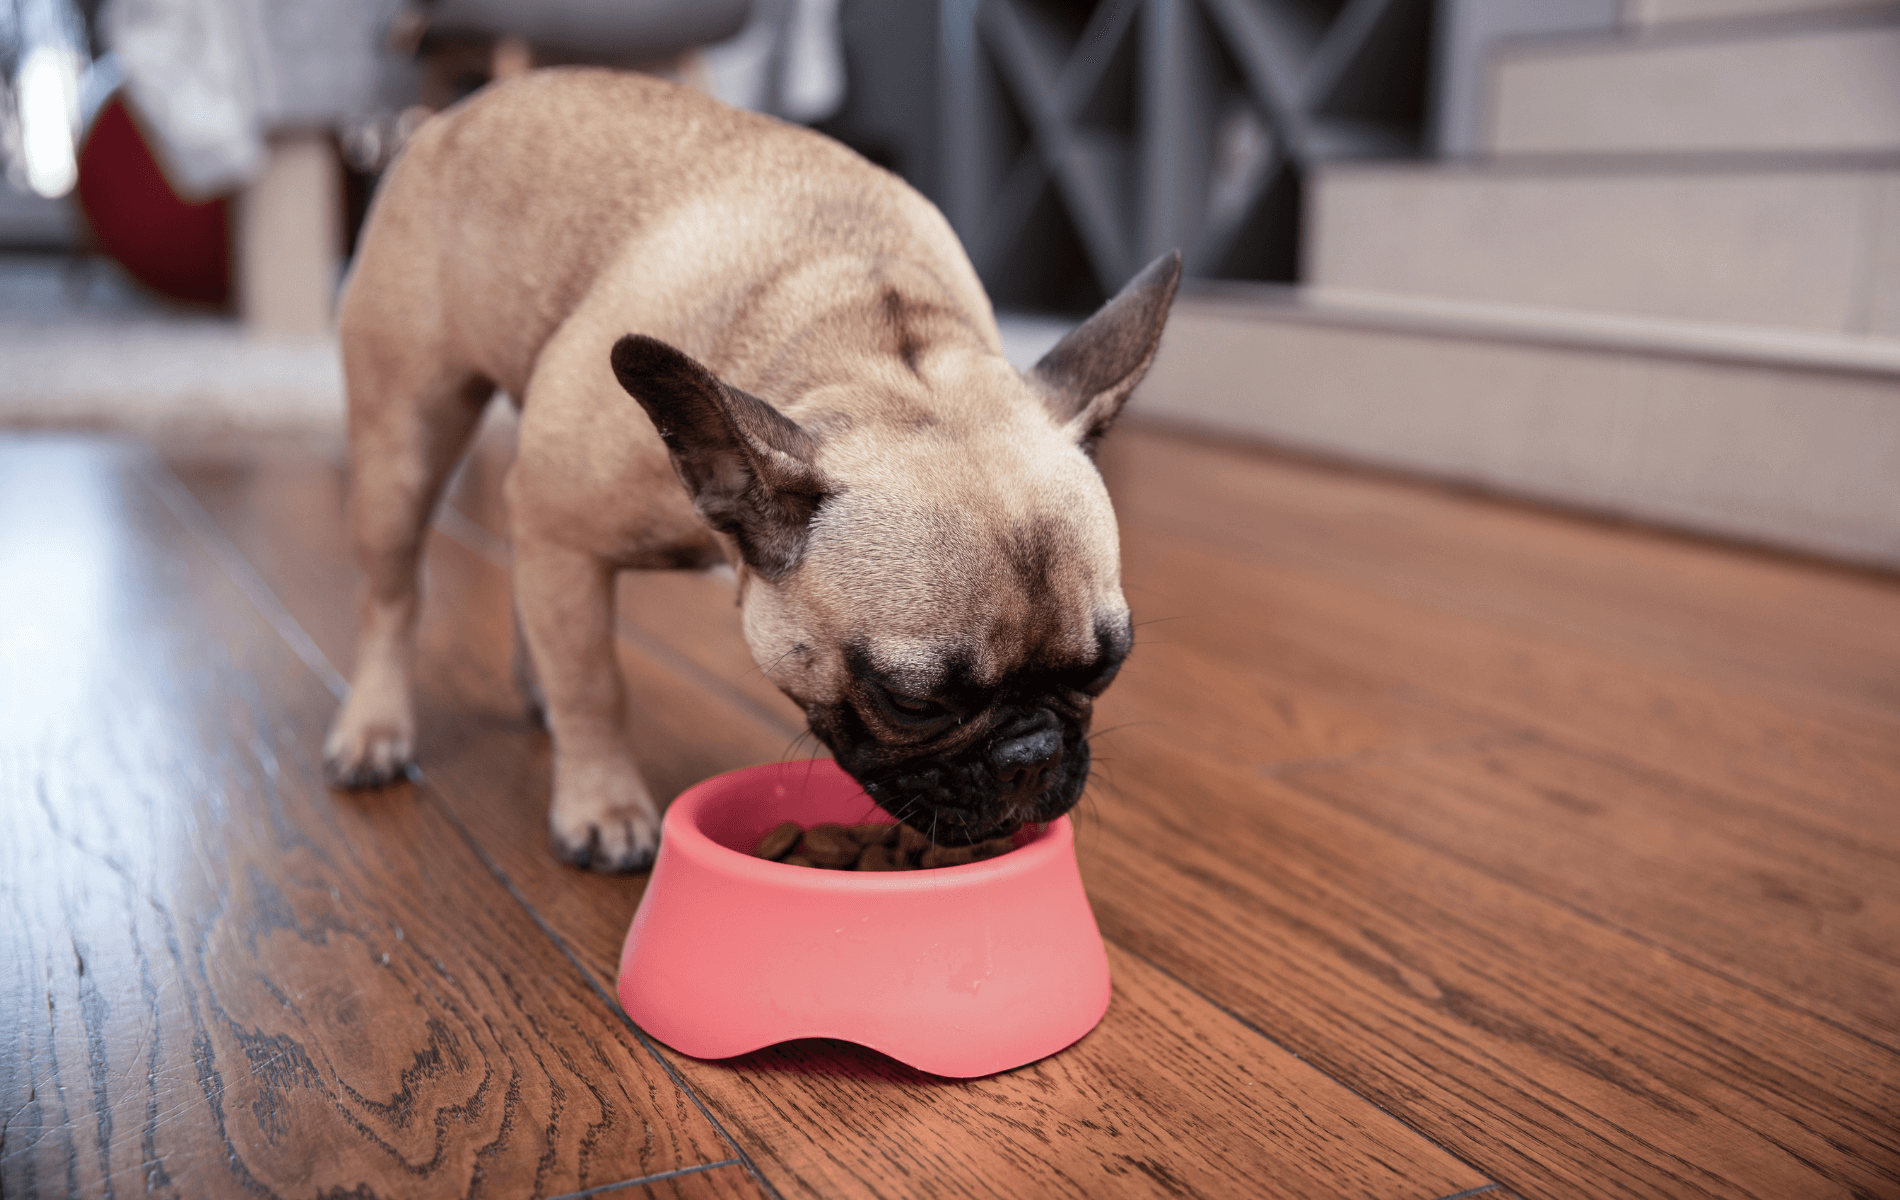 A dog eating from a bowl